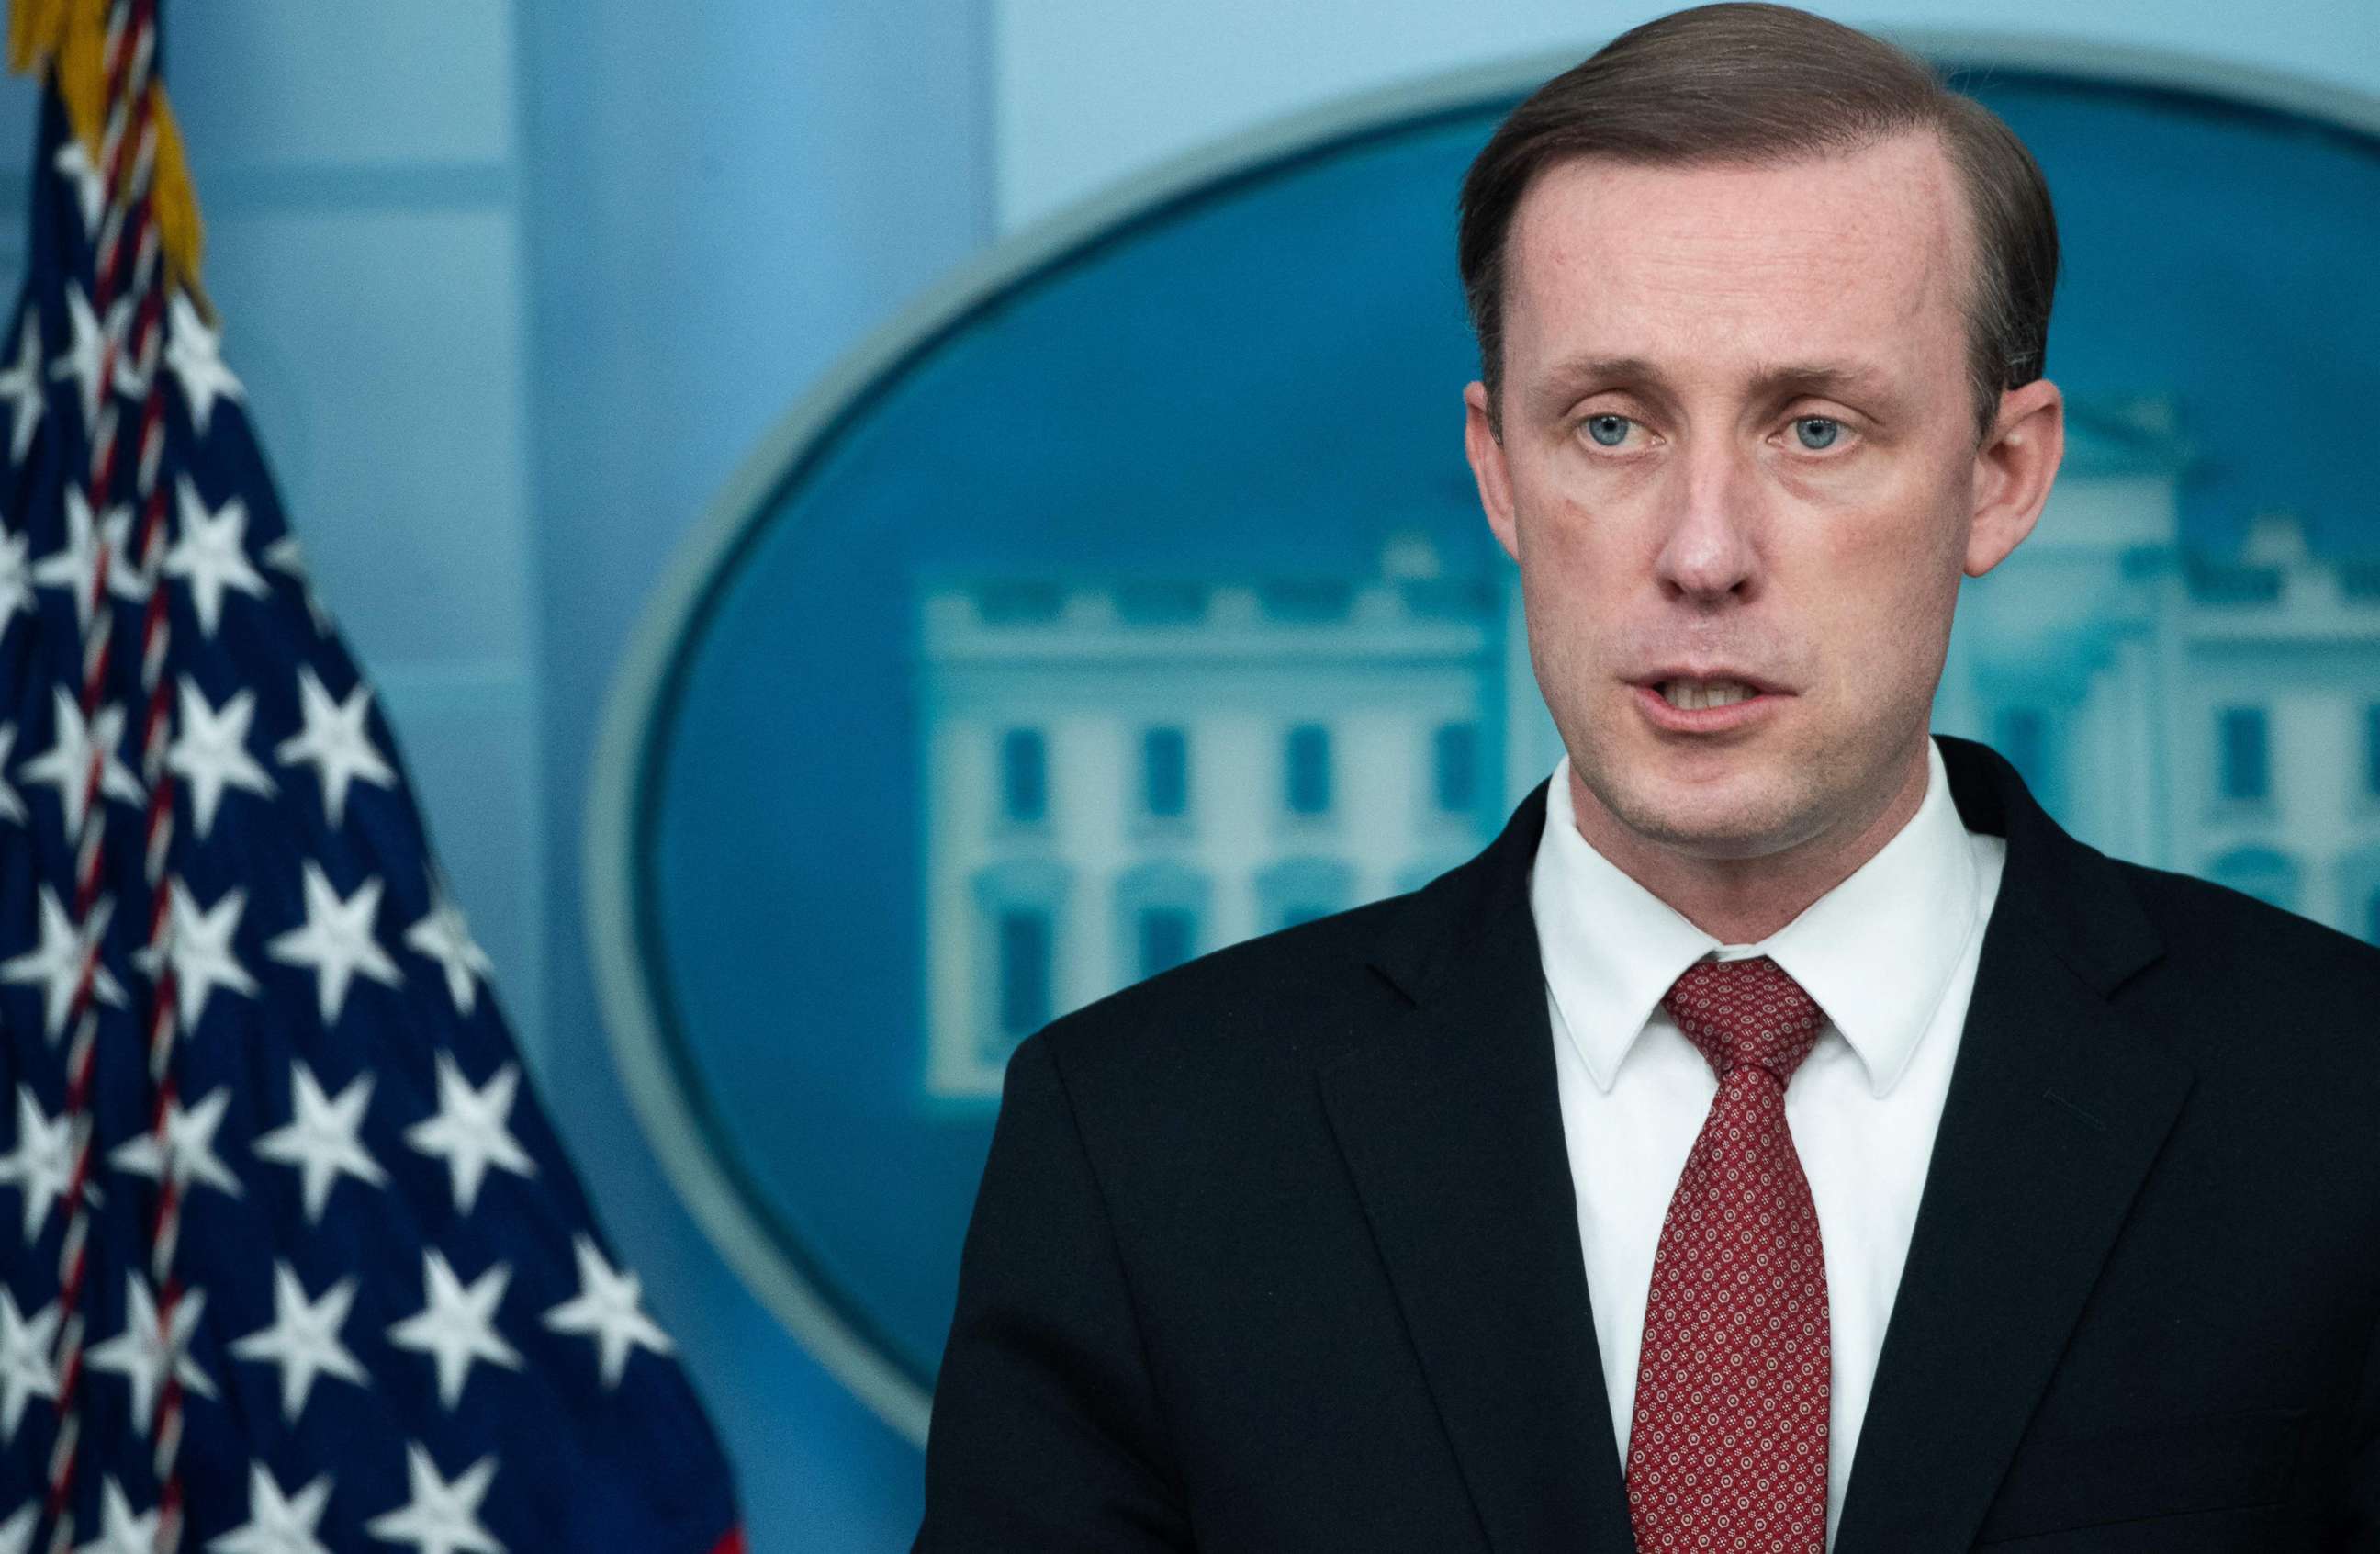 PHOTO: National Security Adviser Jake Sullivan speaks during the daily briefing in the Brady Briefing Room of the White House in Washington on Feb. 11, 2022. - A Russian invasion of Ukraine "could begin at any time."